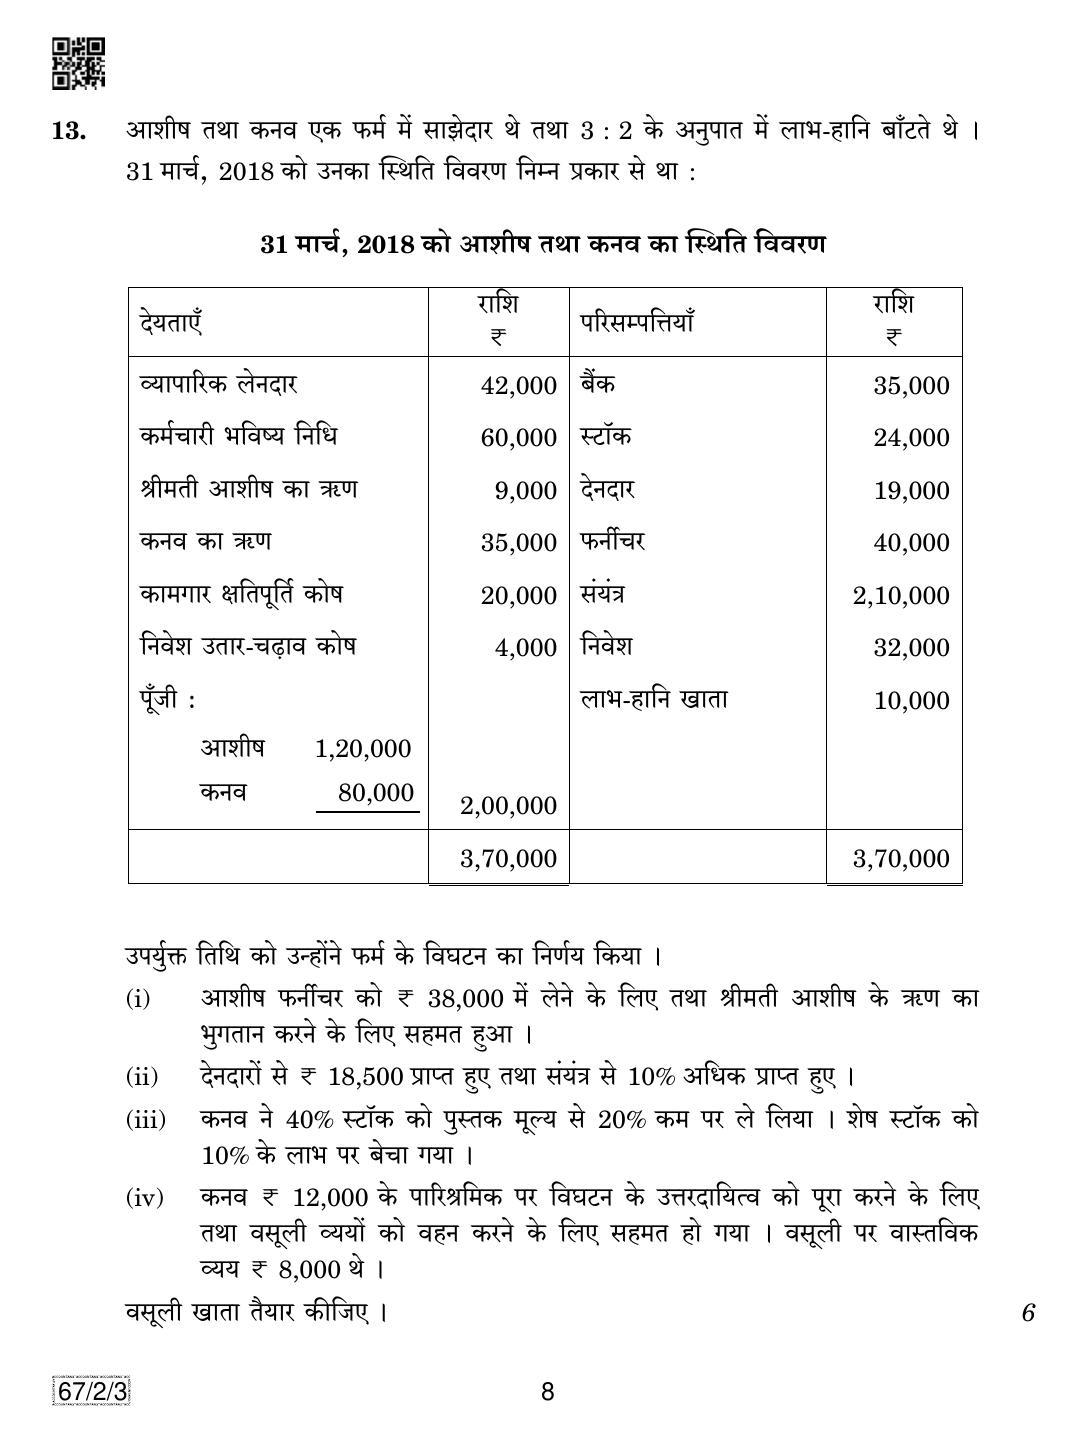 CBSE Class 12 67-2-3 Accountancy 2019 Question Paper - Page 8